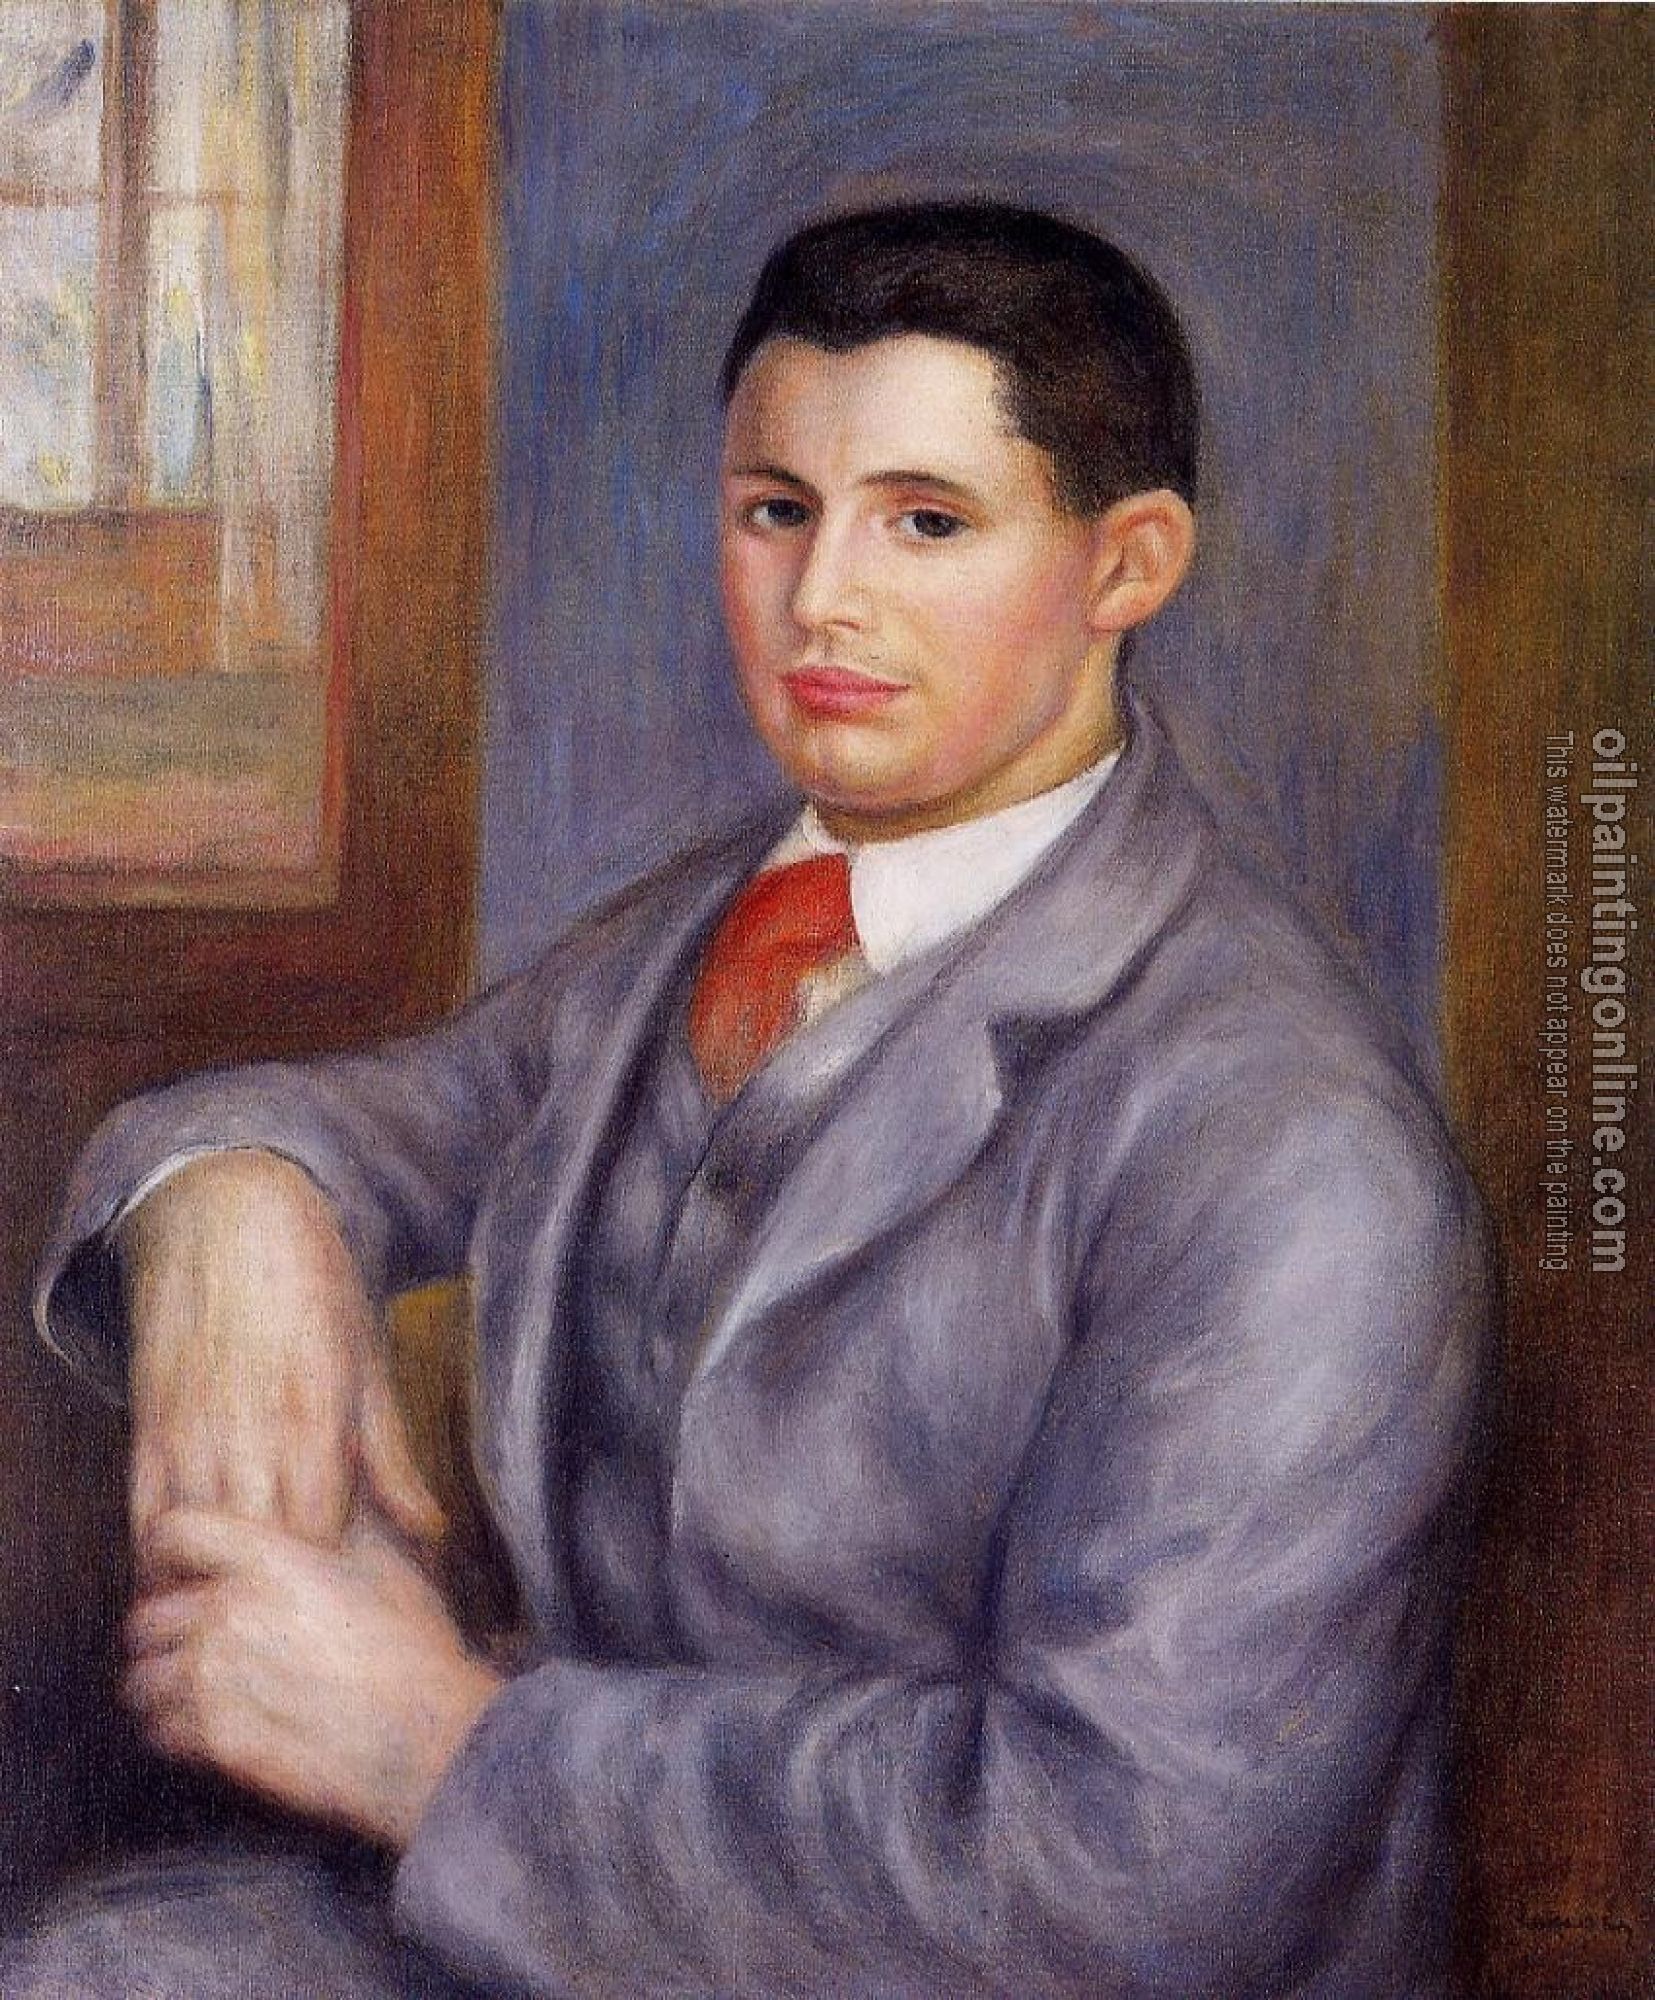 Renoir, Pierre Auguste - Young Man in a Red Tie